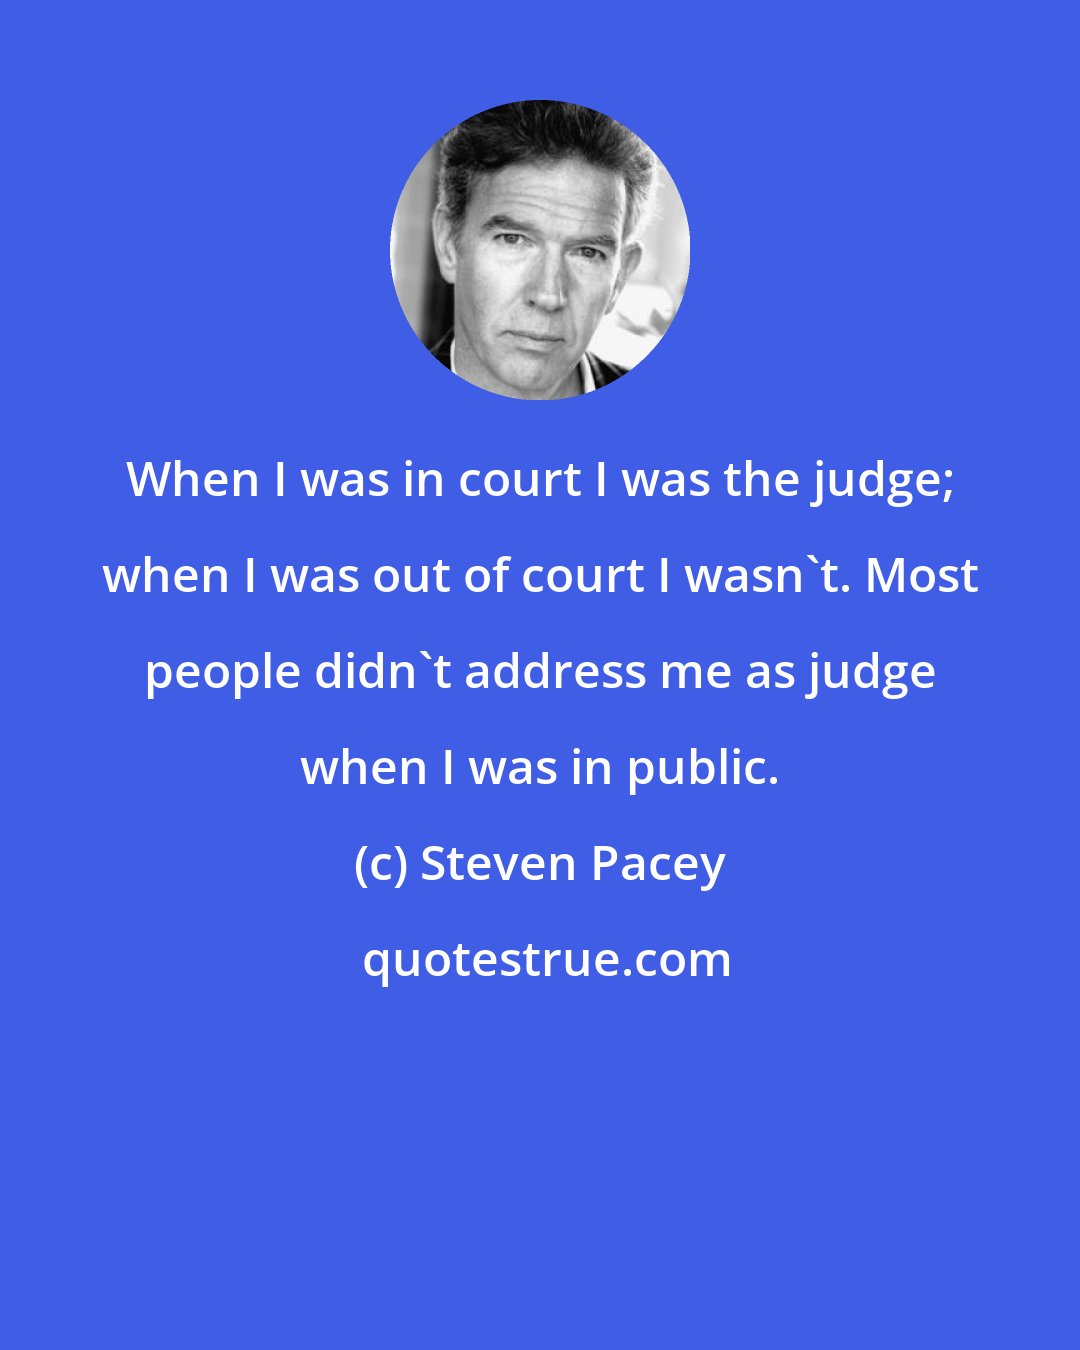 Steven Pacey: When I was in court I was the judge; when I was out of court I wasn't. Most people didn't address me as judge when I was in public.